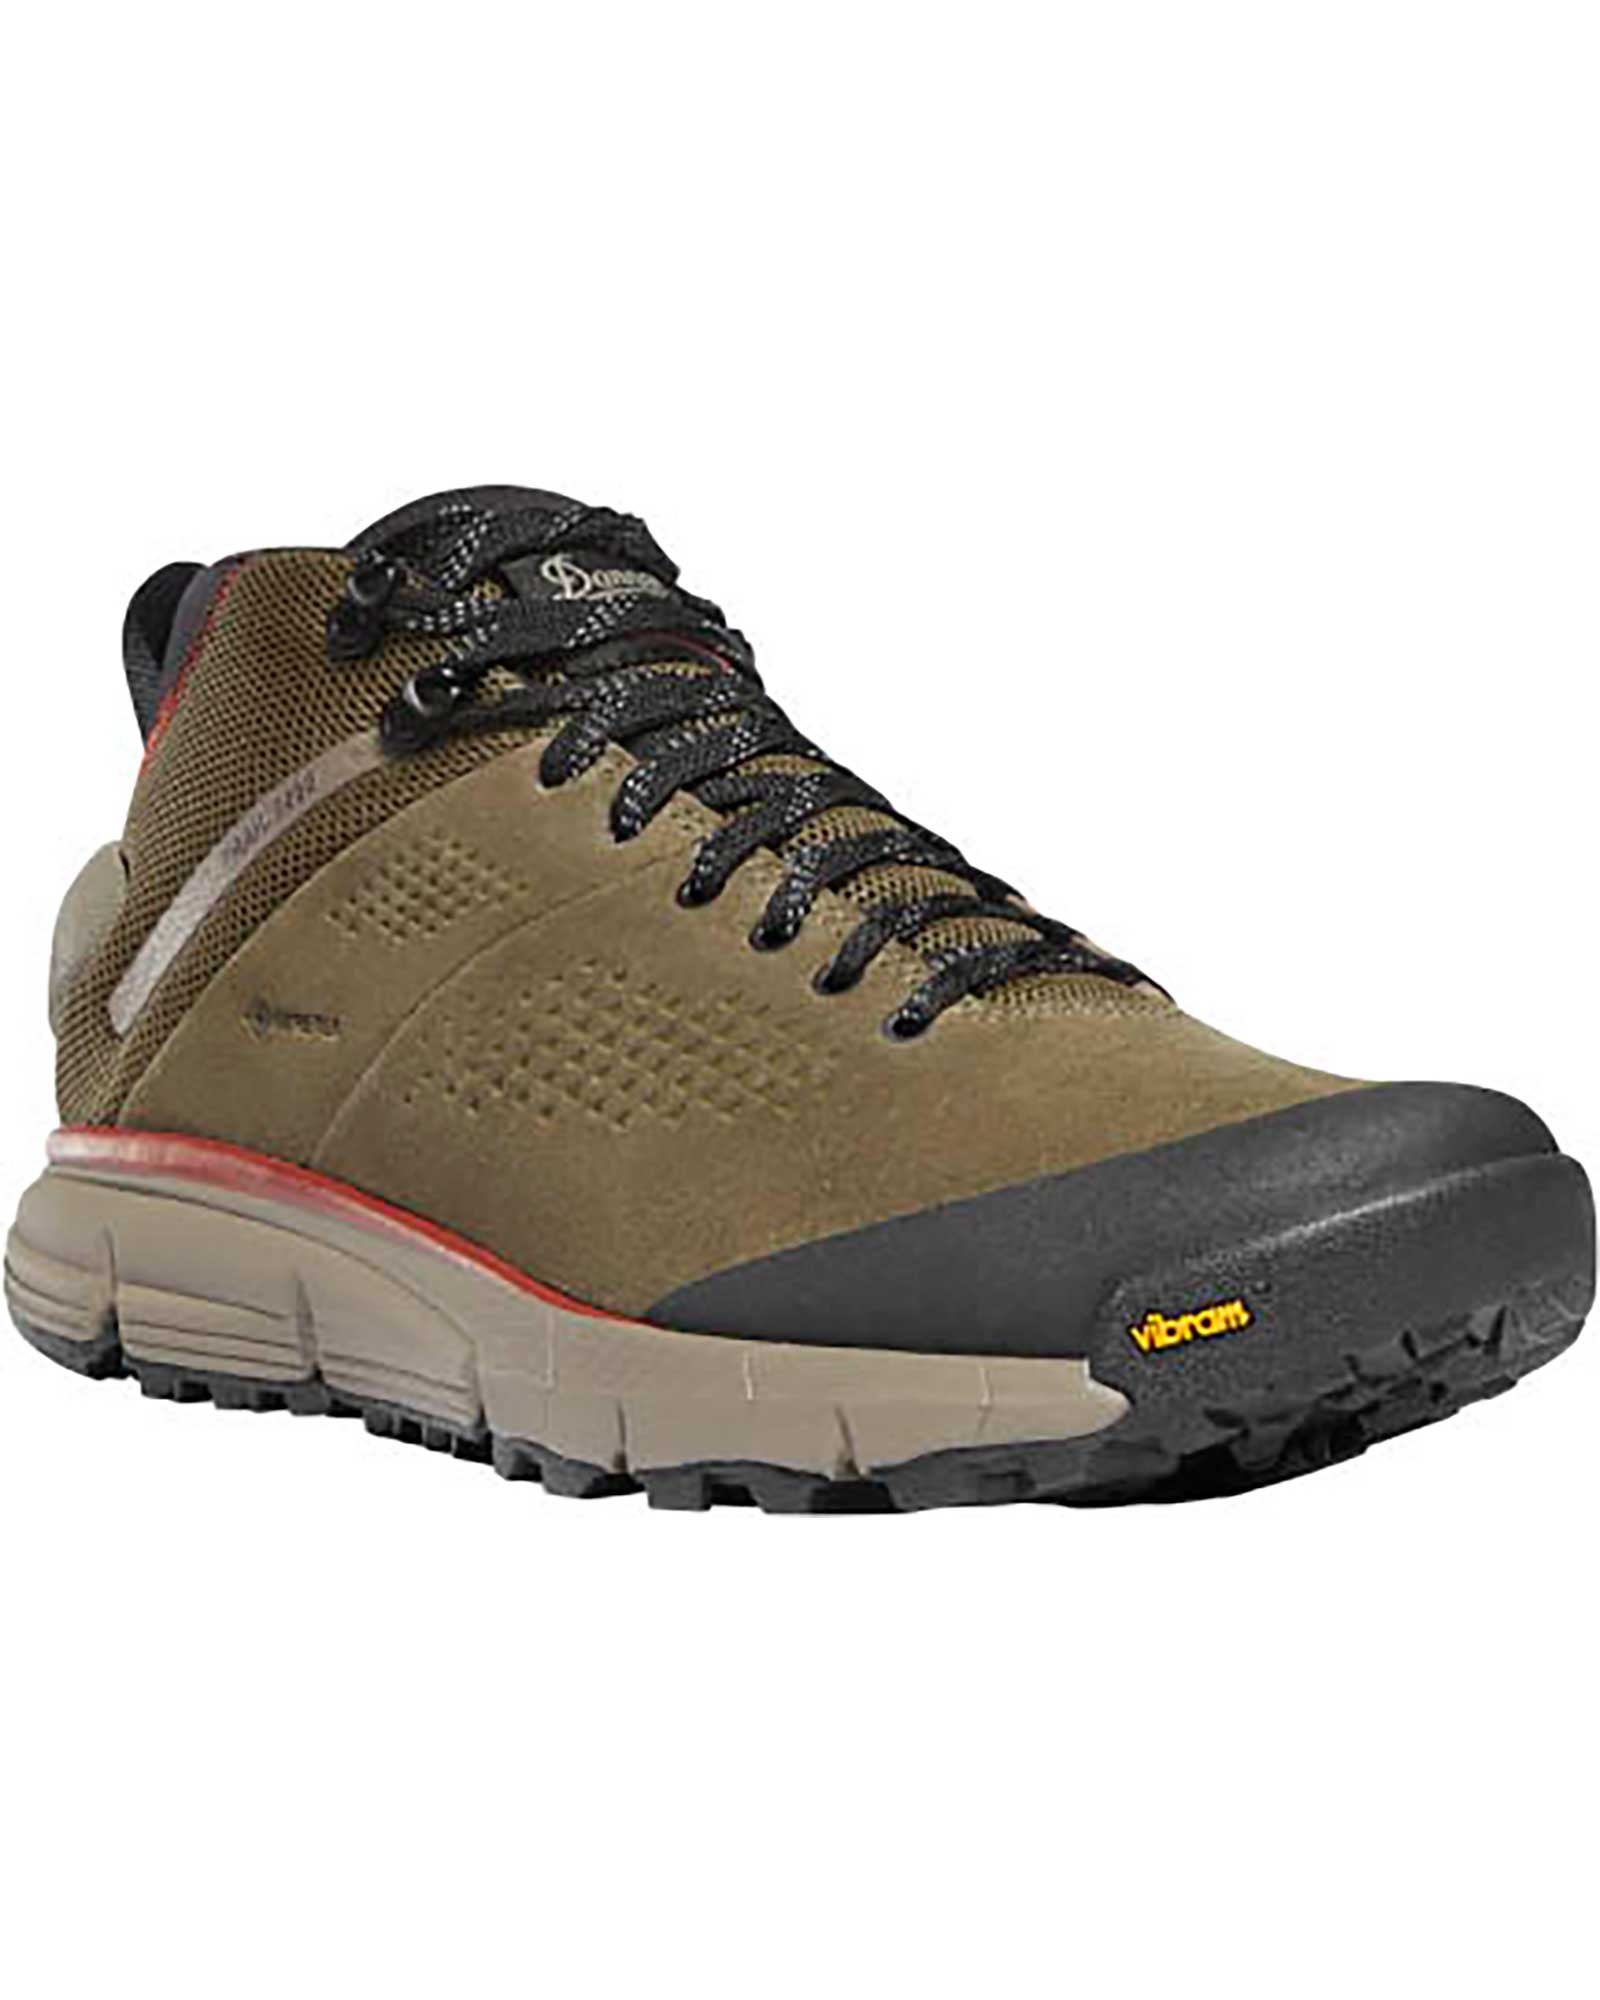 Danner Men’s Trail 2650 Mid GORE TEX Boots - Dusty Olive UK 10